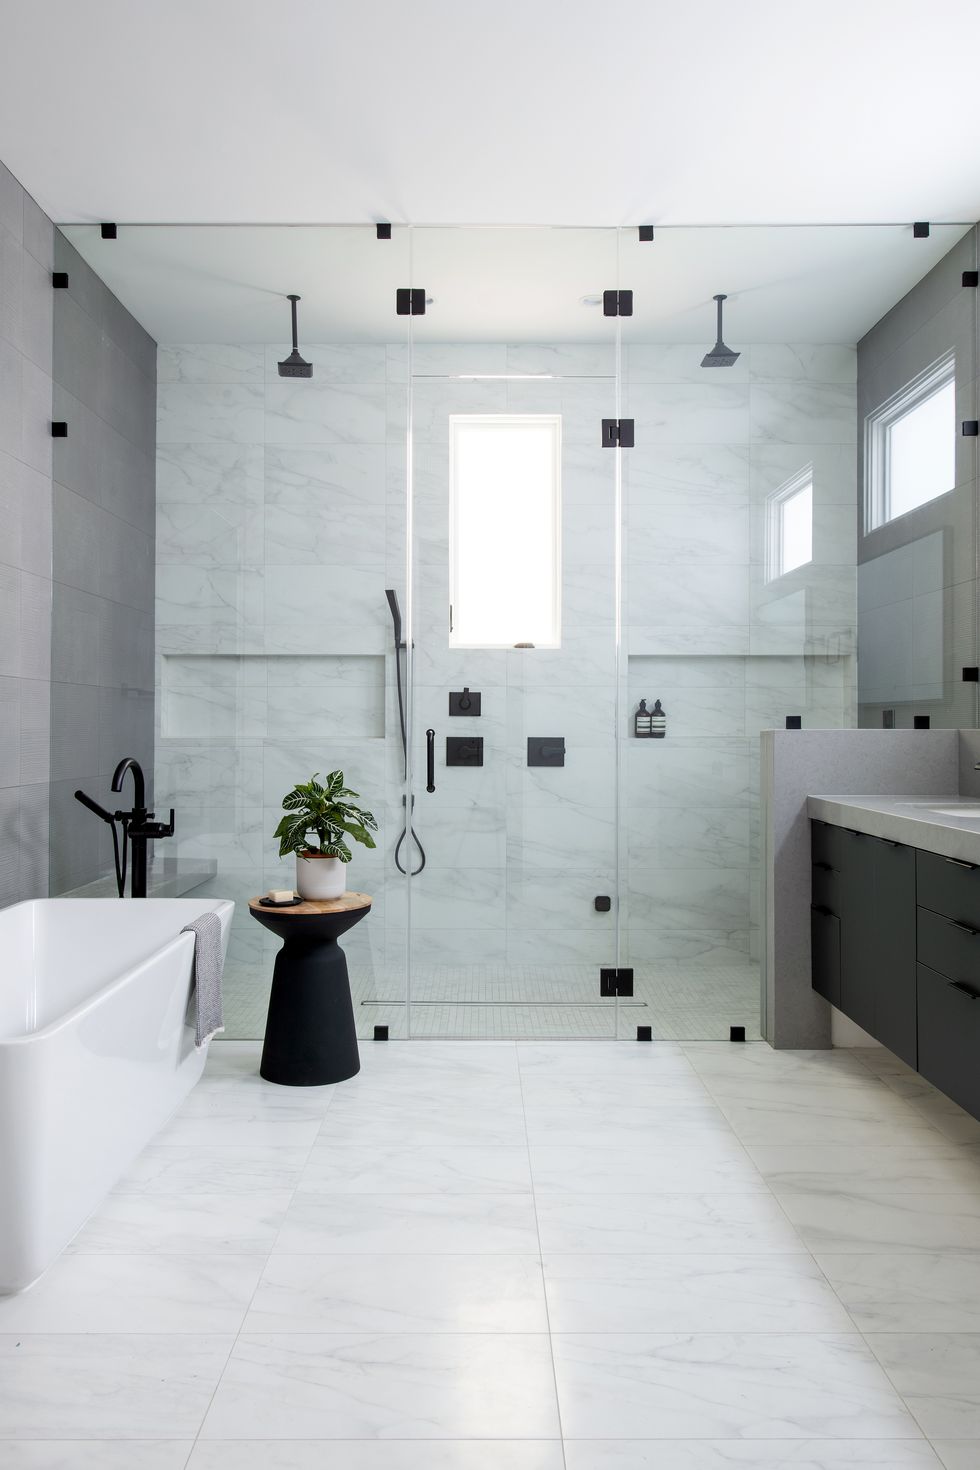 6 Walk-in Shower Remodeling Ideas to Elevate Your Bathroom Design